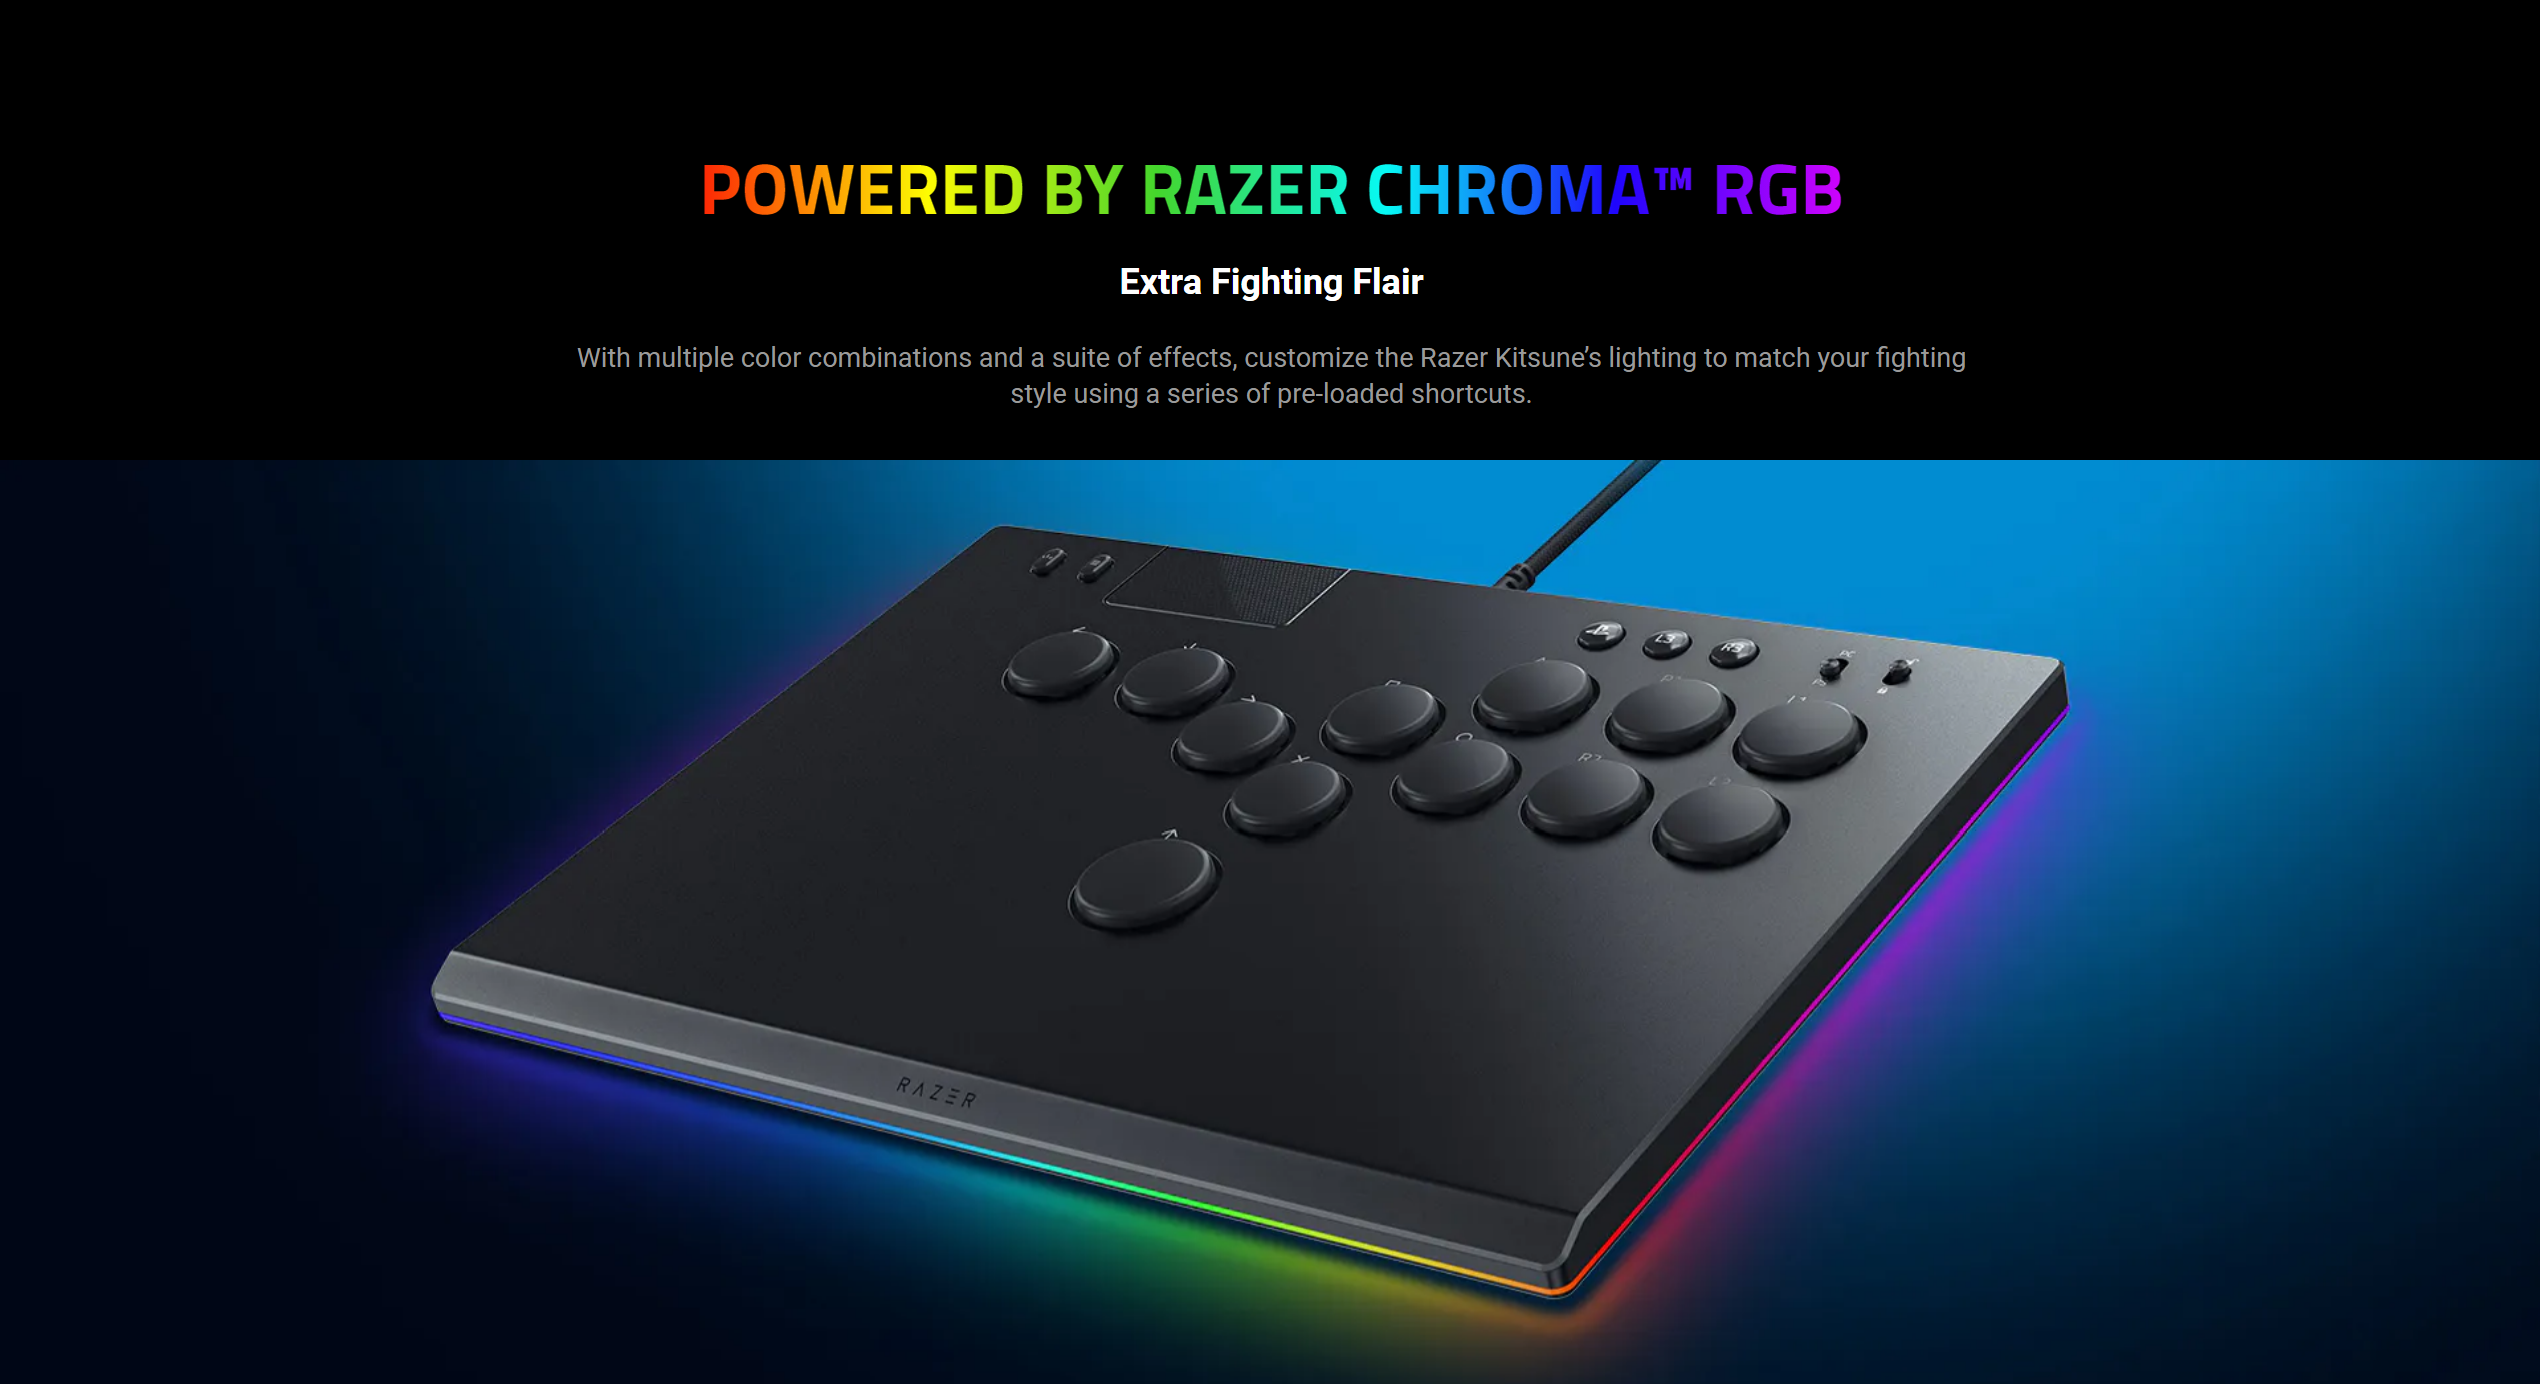 A large marketing image providing additional information about the product Razer Kitsune - All-Button Optical Arcade Controller for PS5 and PC - Additional alt info not provided